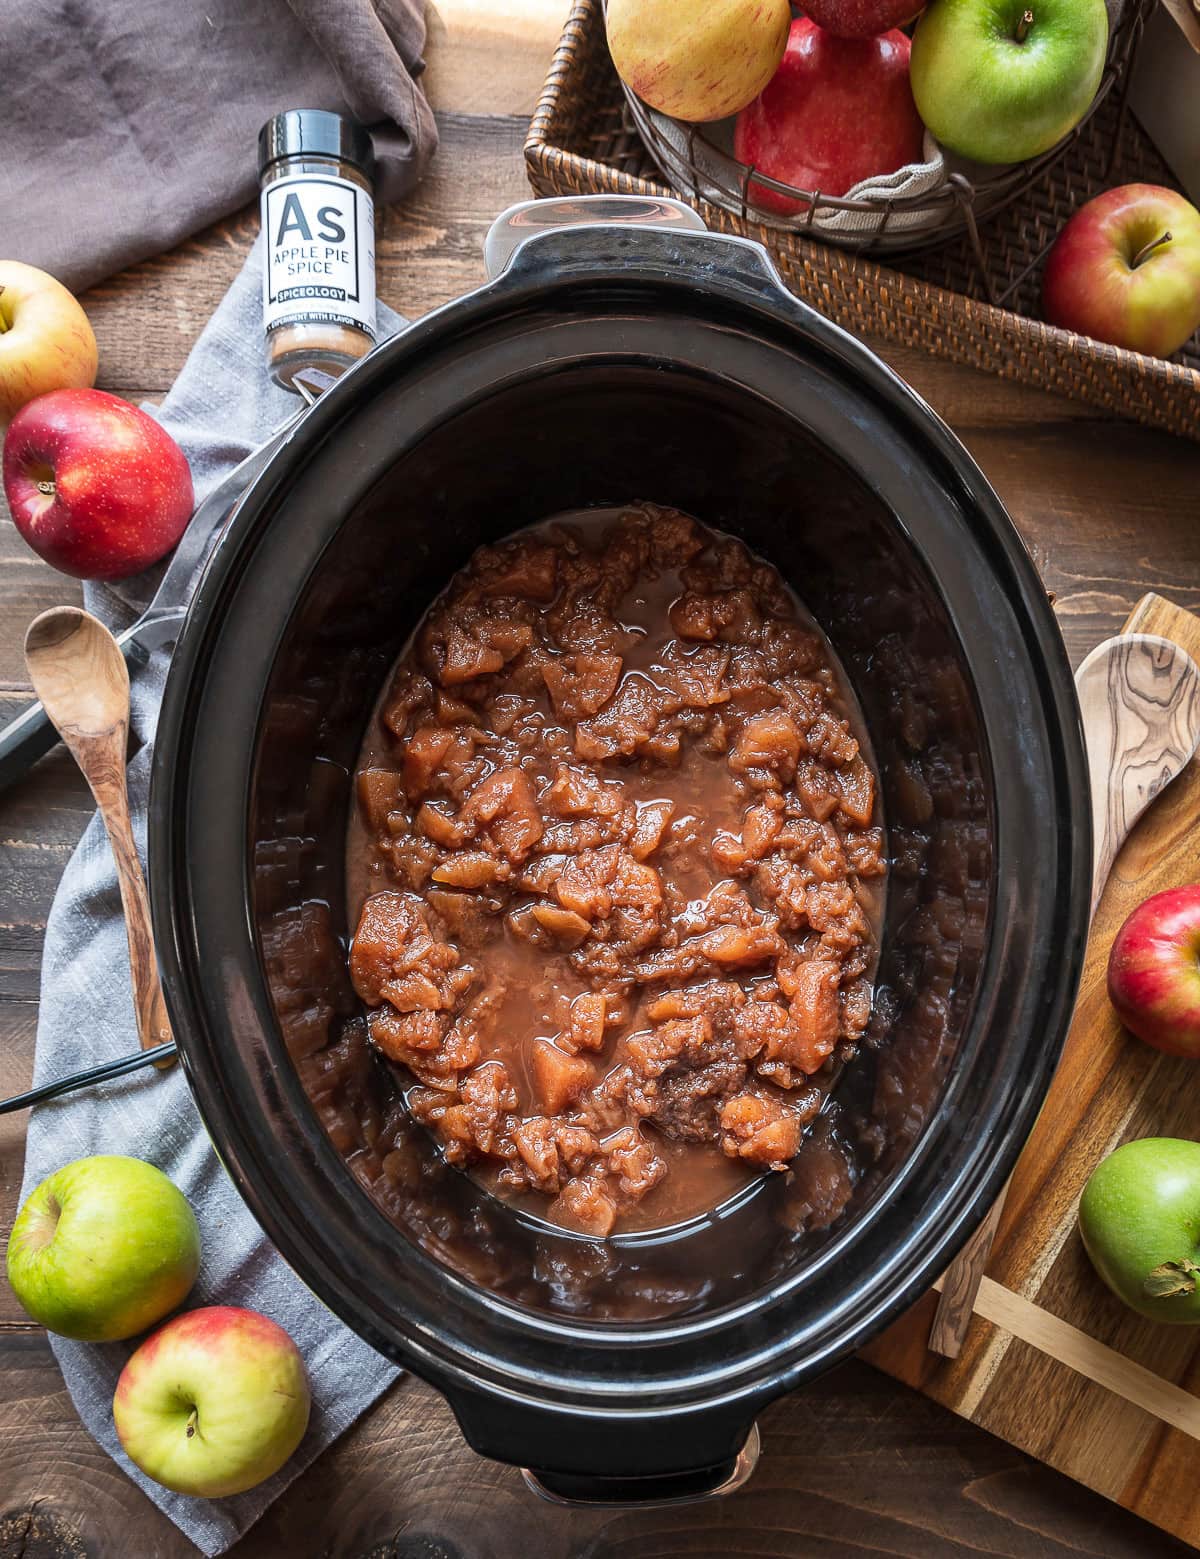  cooked apples in a slow cooker jar of spice whole apples with apples in a basket